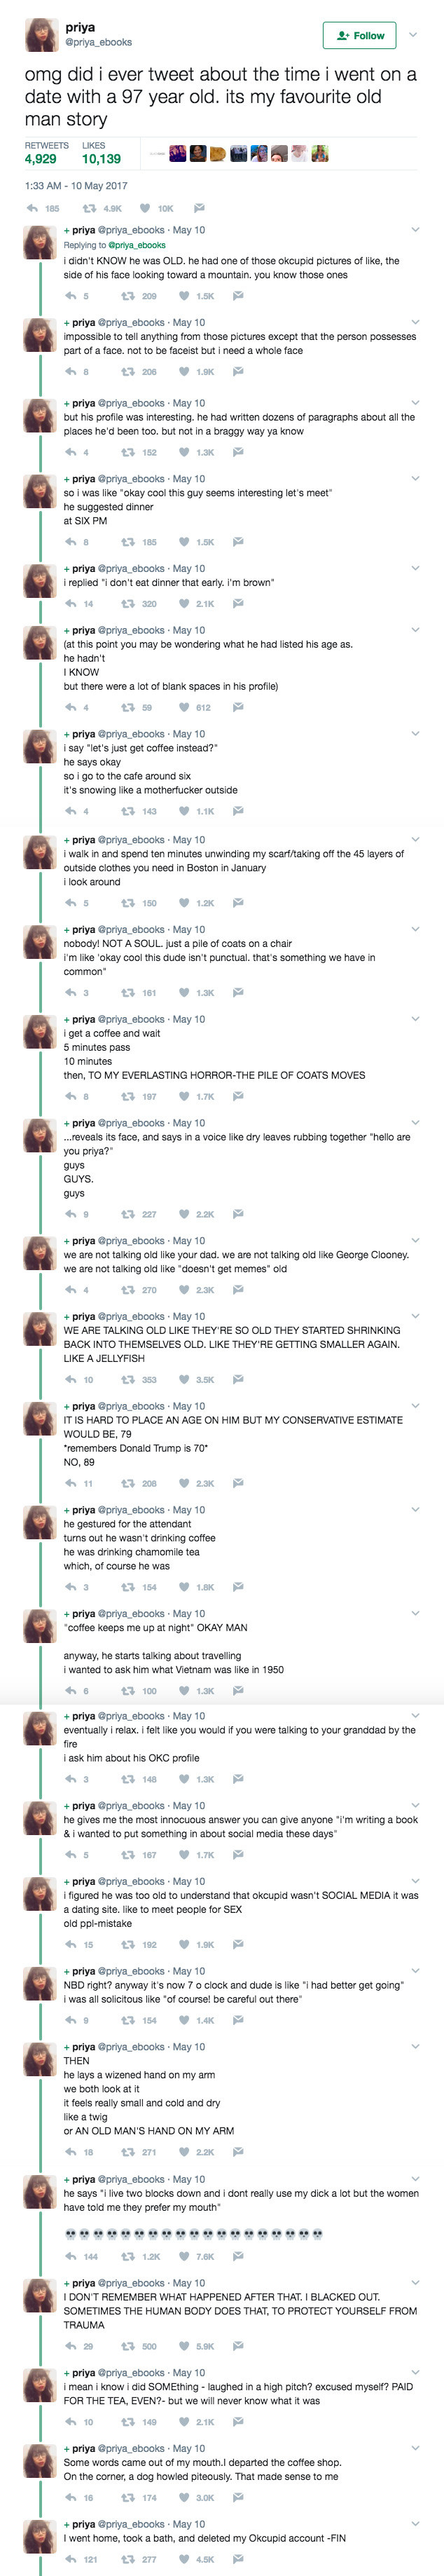 Please Enjoy These Twitter Stories That Are Long But Worth The Read